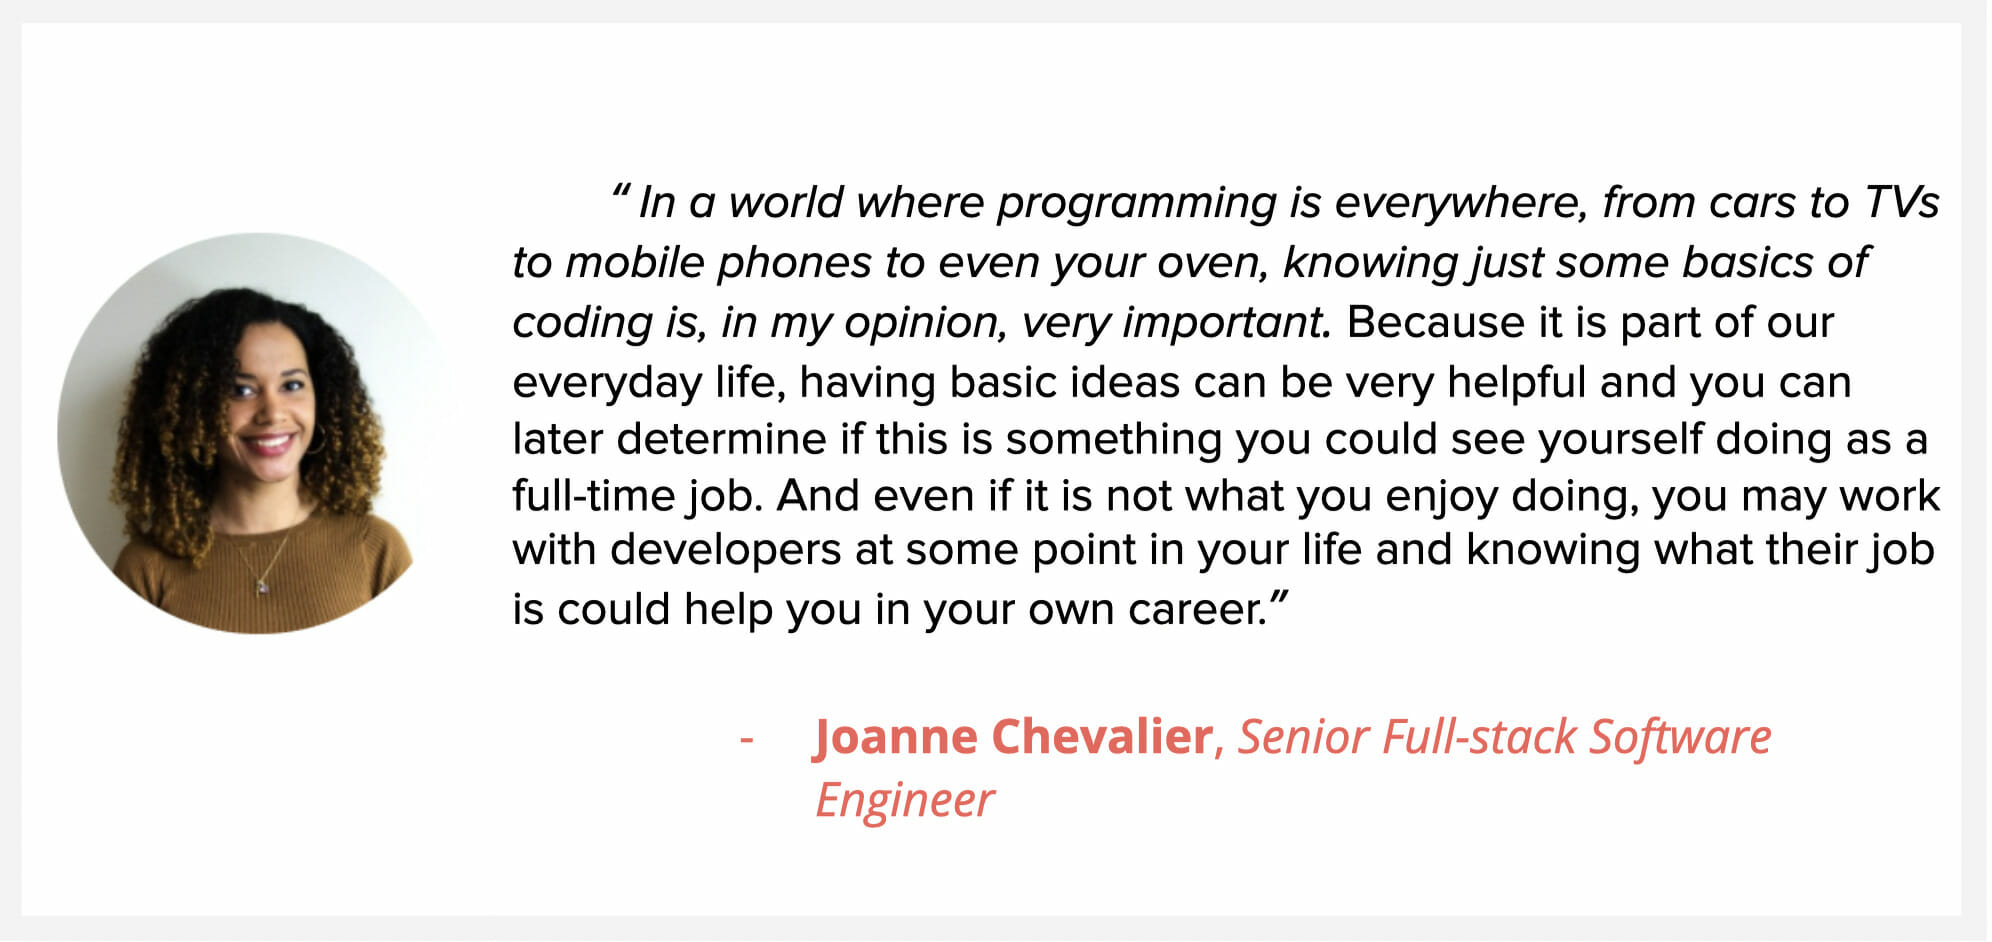 Sr. Full Slack developer Joanne Chevalier, says “In a world where programming is everywhere, from cars to TVs to mobile phones to even your oven, knowing just some basics of coding is, in my opinion, very important. Because it is part of our everyday life, having basic ideas can be very helpful and you can later determine if this is something you could see yourself doing as a full-time job. And even if it is not what you enjoy doing, you may work with developers at some point in your life and knowing what their job is could help you in your own career.”